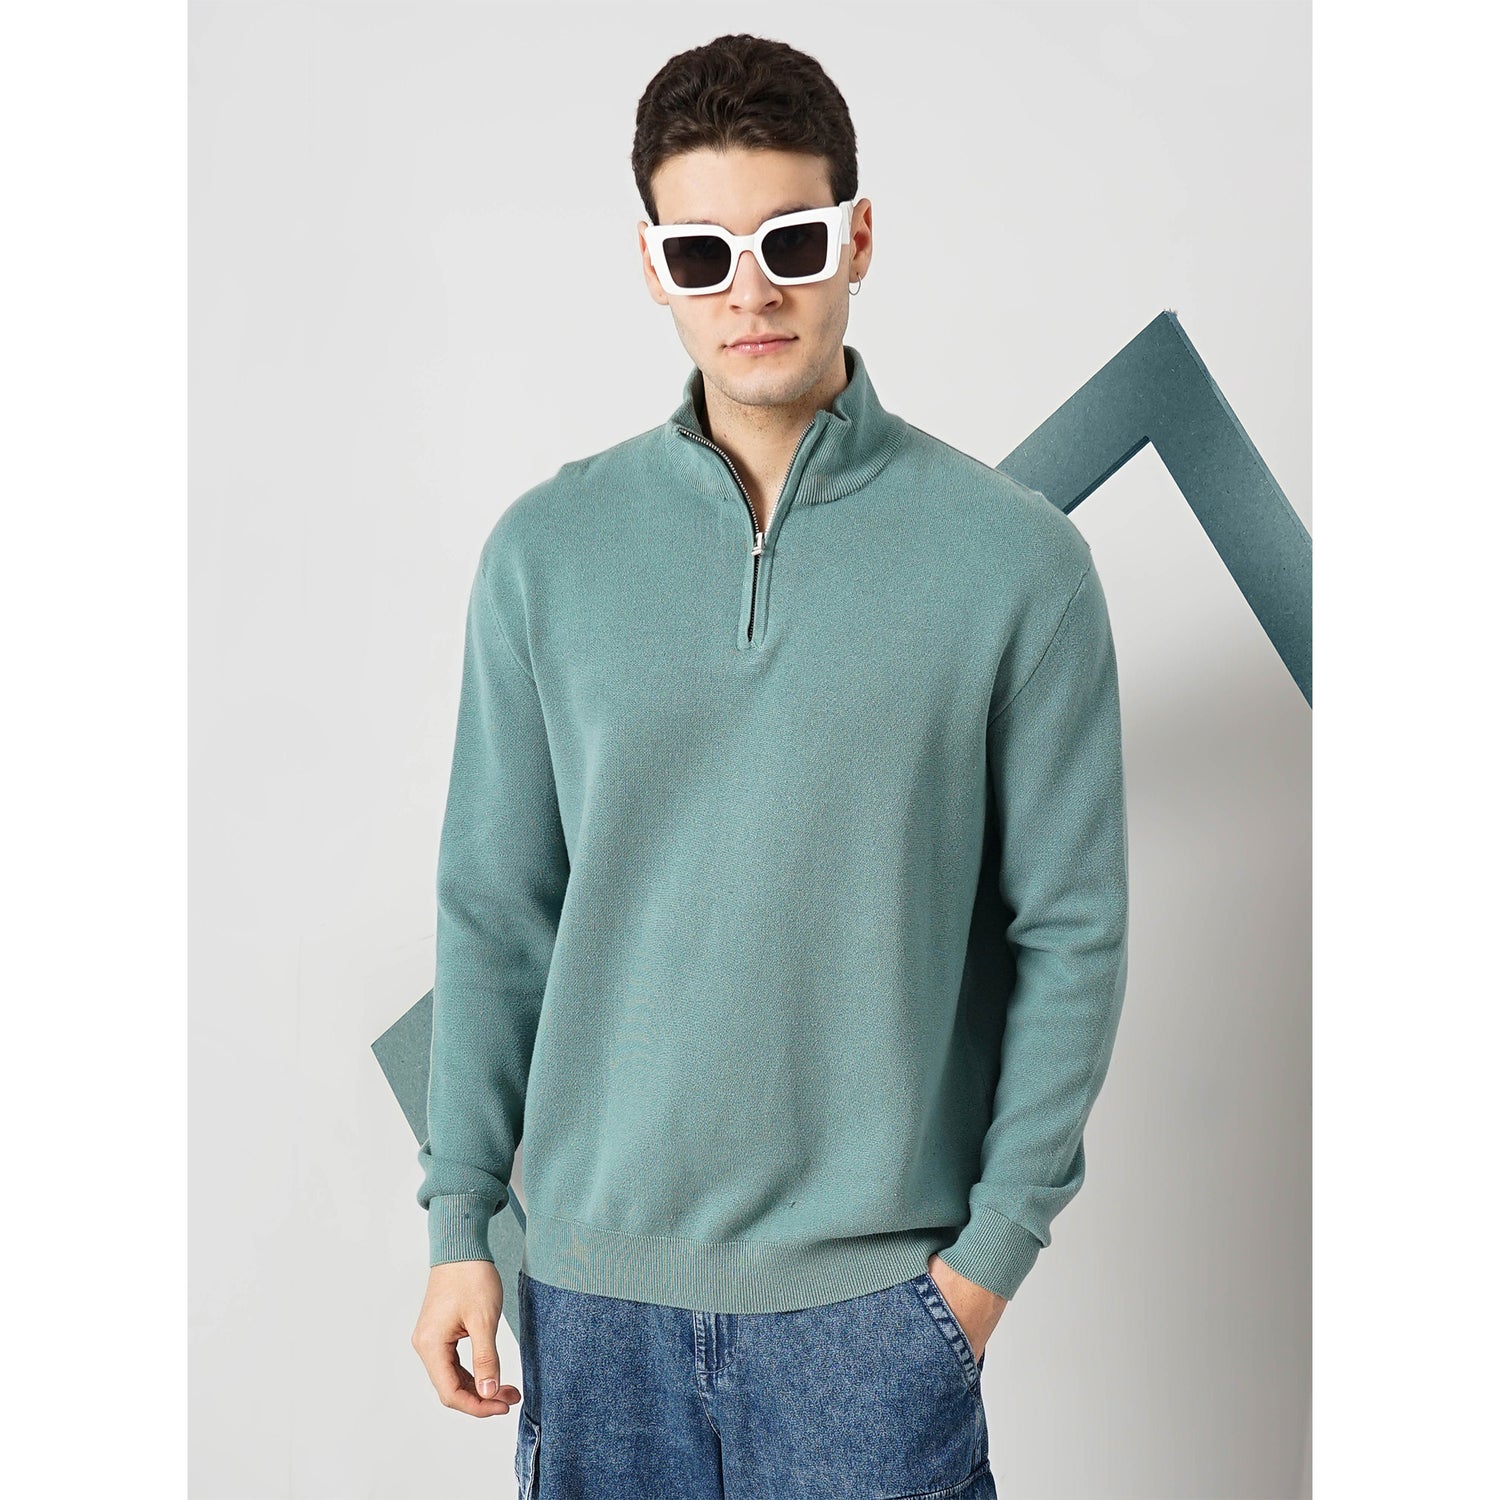 Cotton-Poly-Blend Olive Solid Sweater